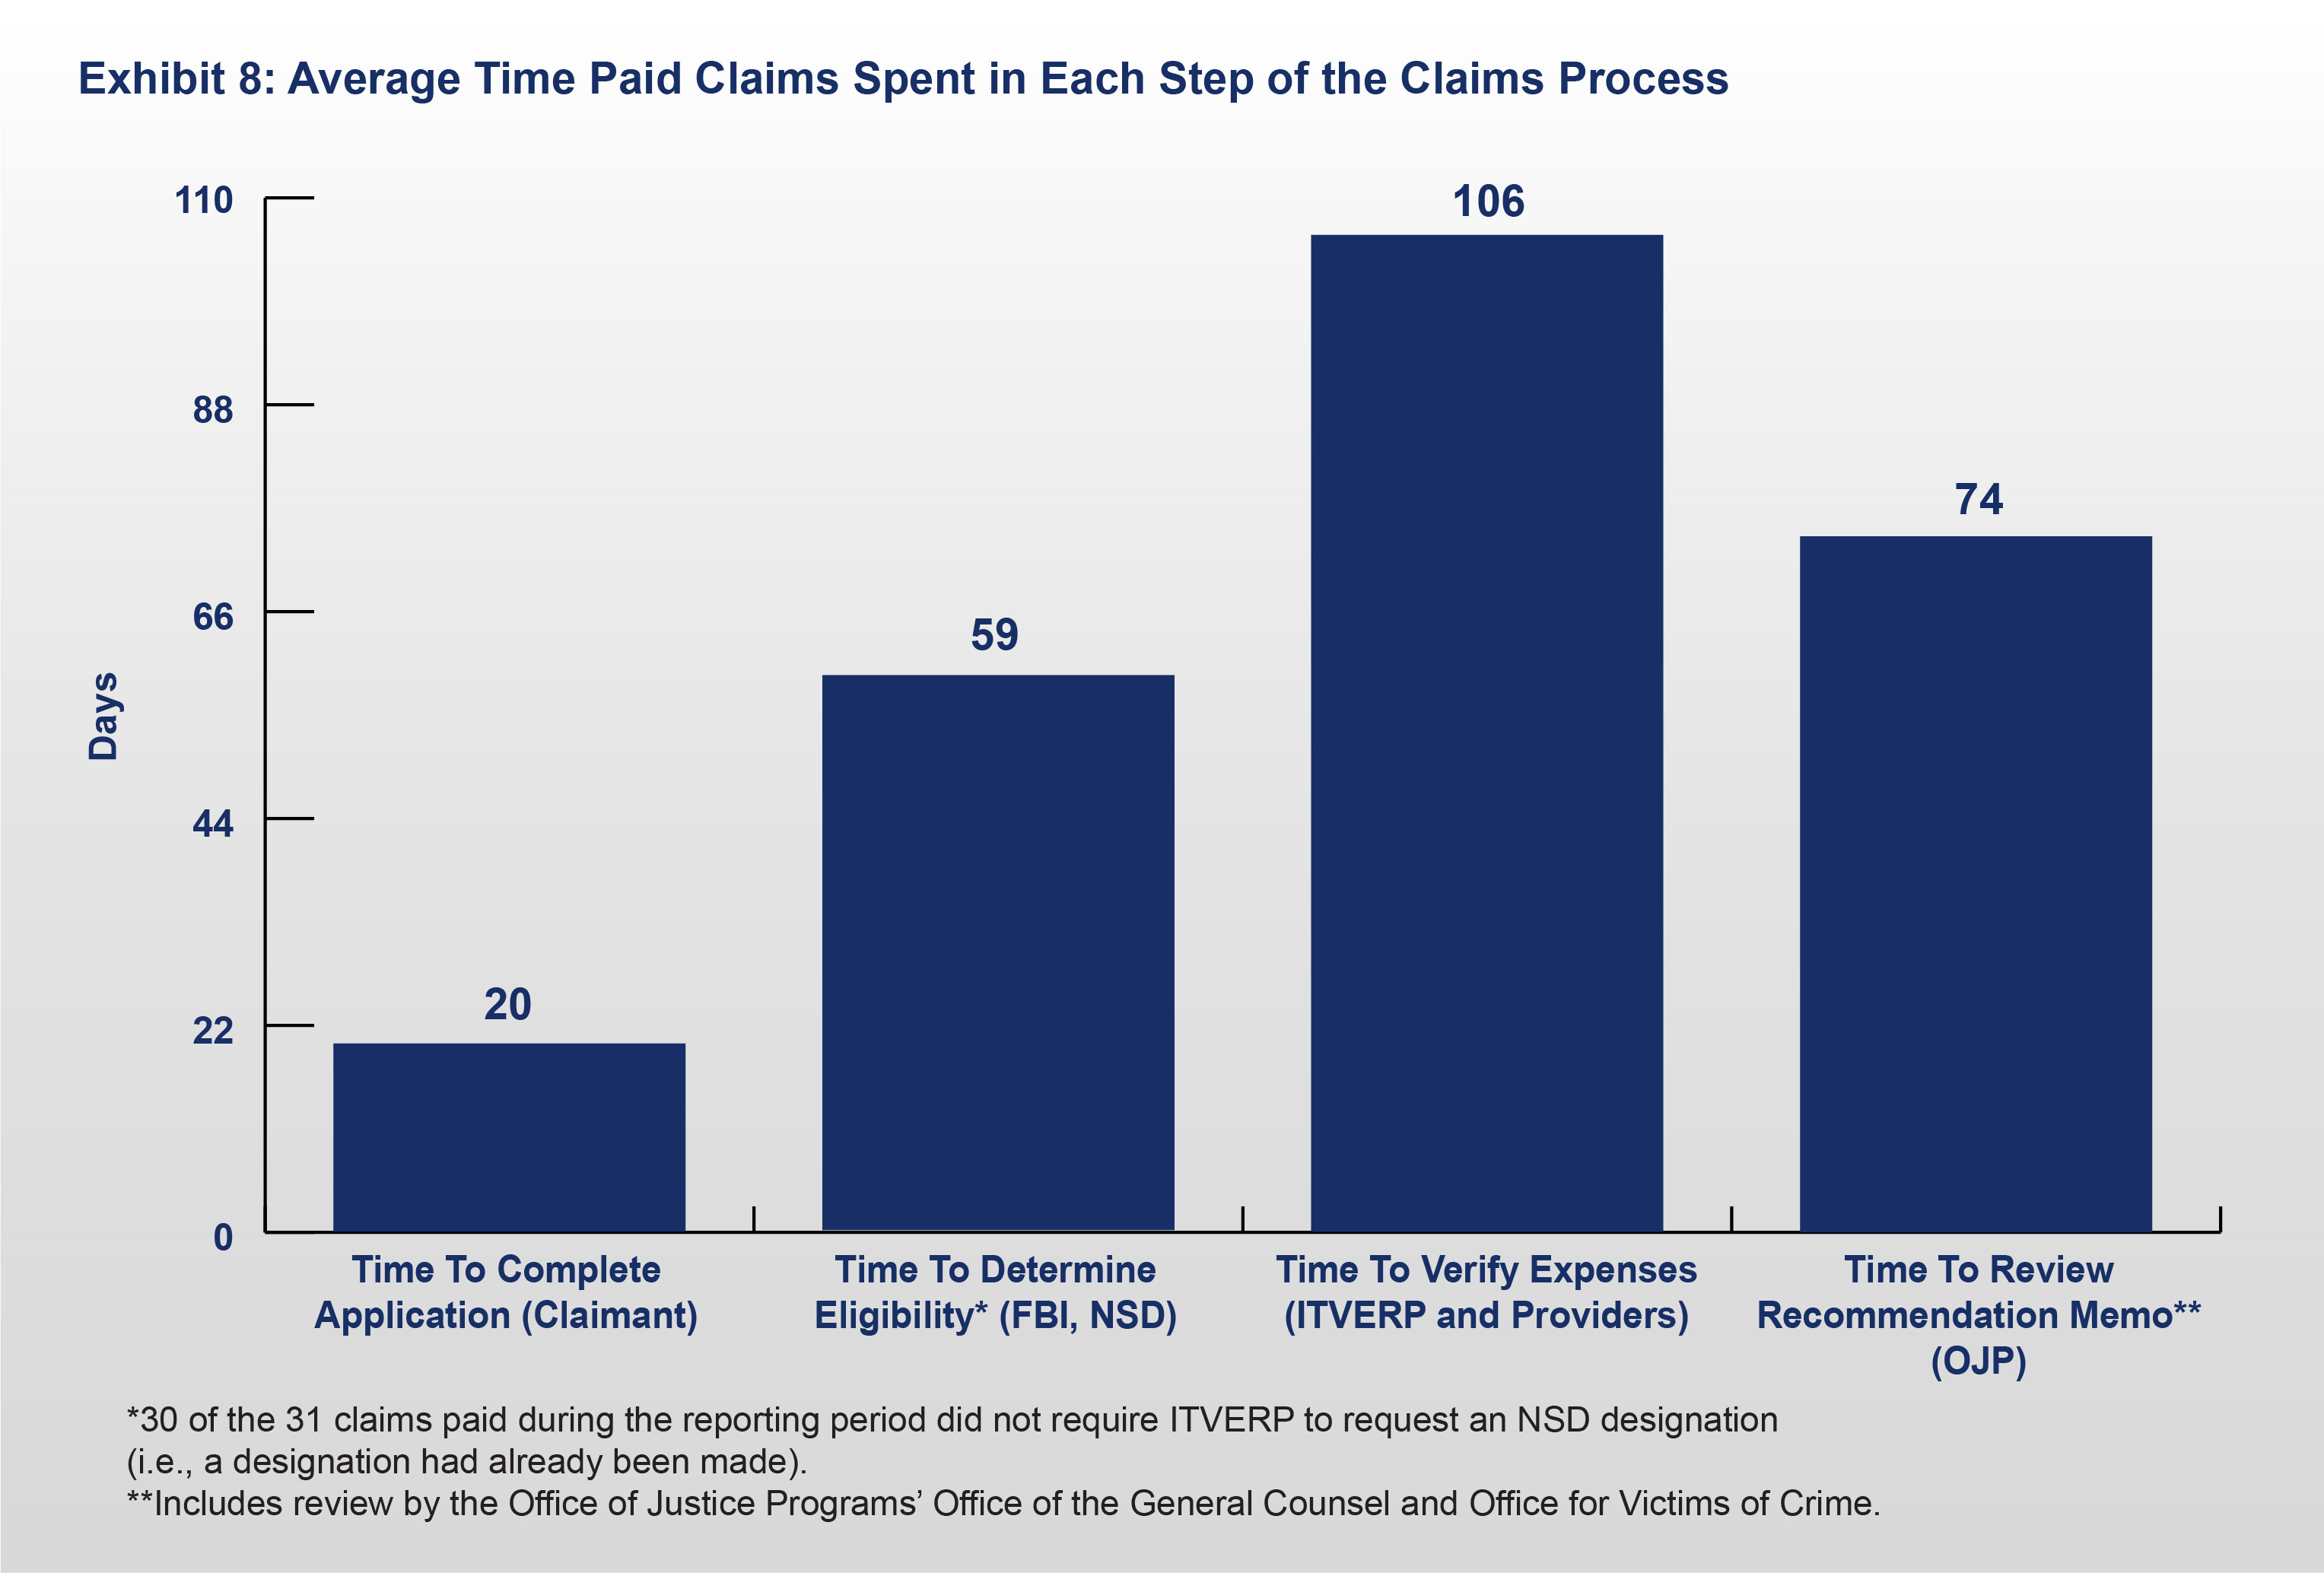 Exhibit 8: Average Time Paid Claims Spent in Each Step of the Claims Process